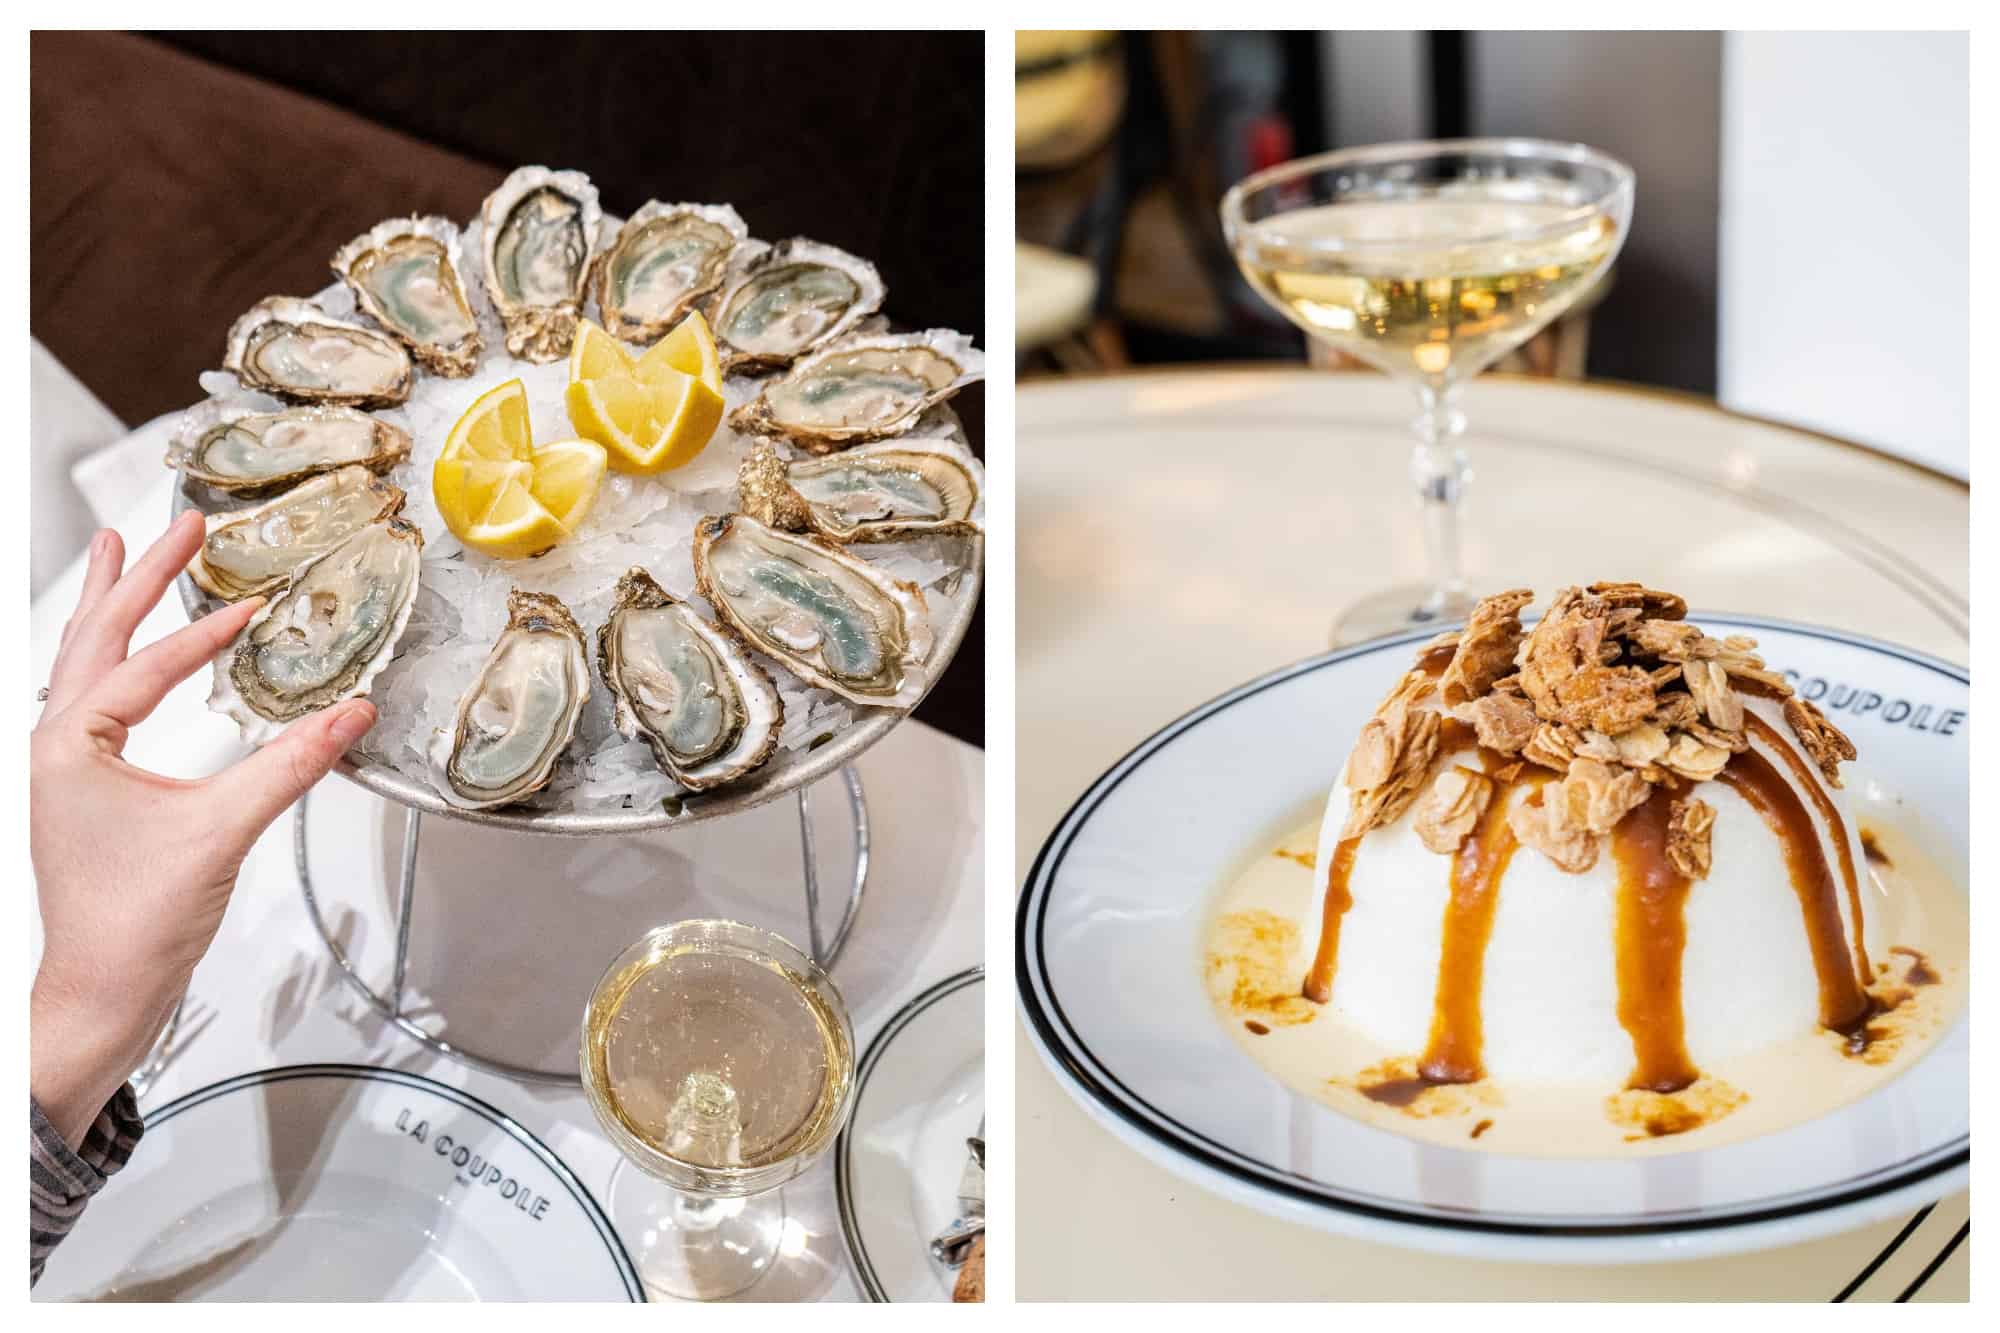 A dish of oysters served on ice with lemon in the middle, a hand is taking an oyster. A plate with the name of the restaurant, La Coupole, on it and a glass of white wine (left). A dish with the dessert Ile Flottante and the name of the restaurant, La Coupole, on it with a glass of white wine (right).